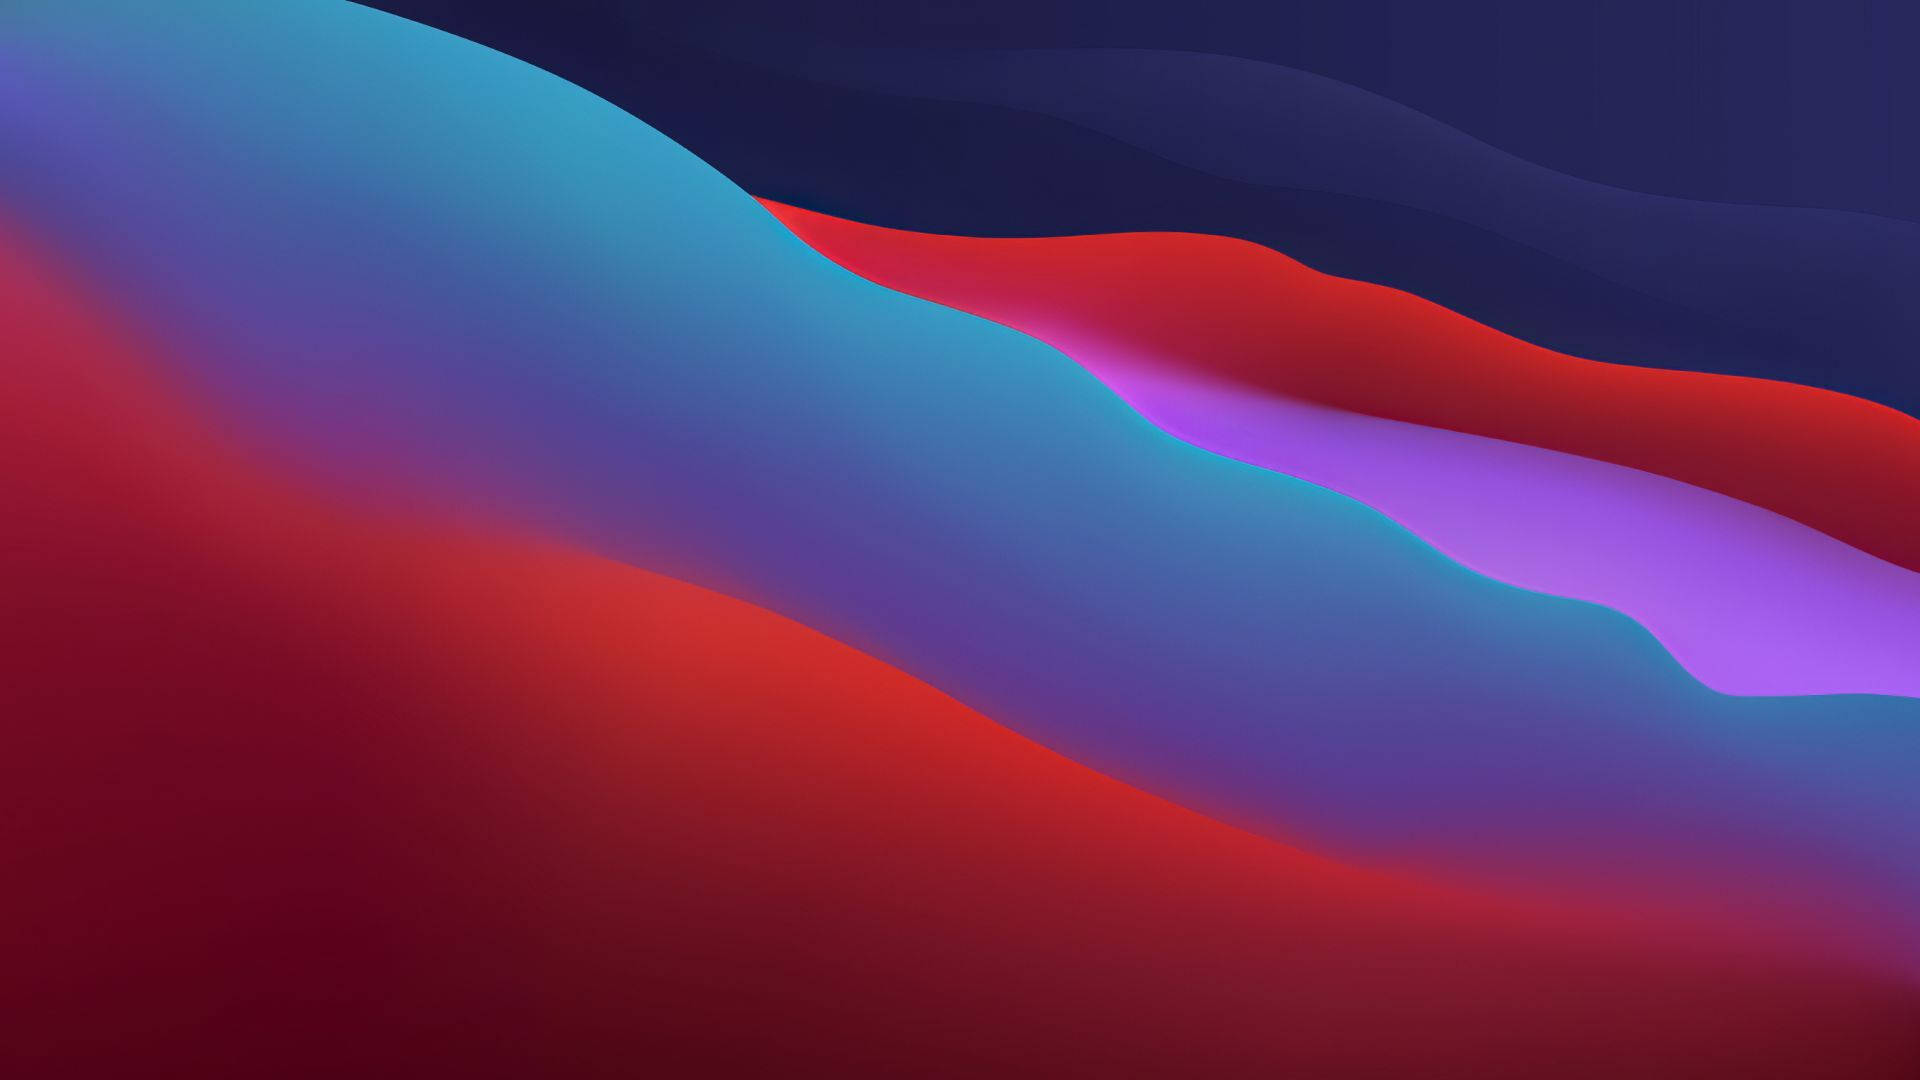 Macos Big Sur Red And Blue Waves Picture